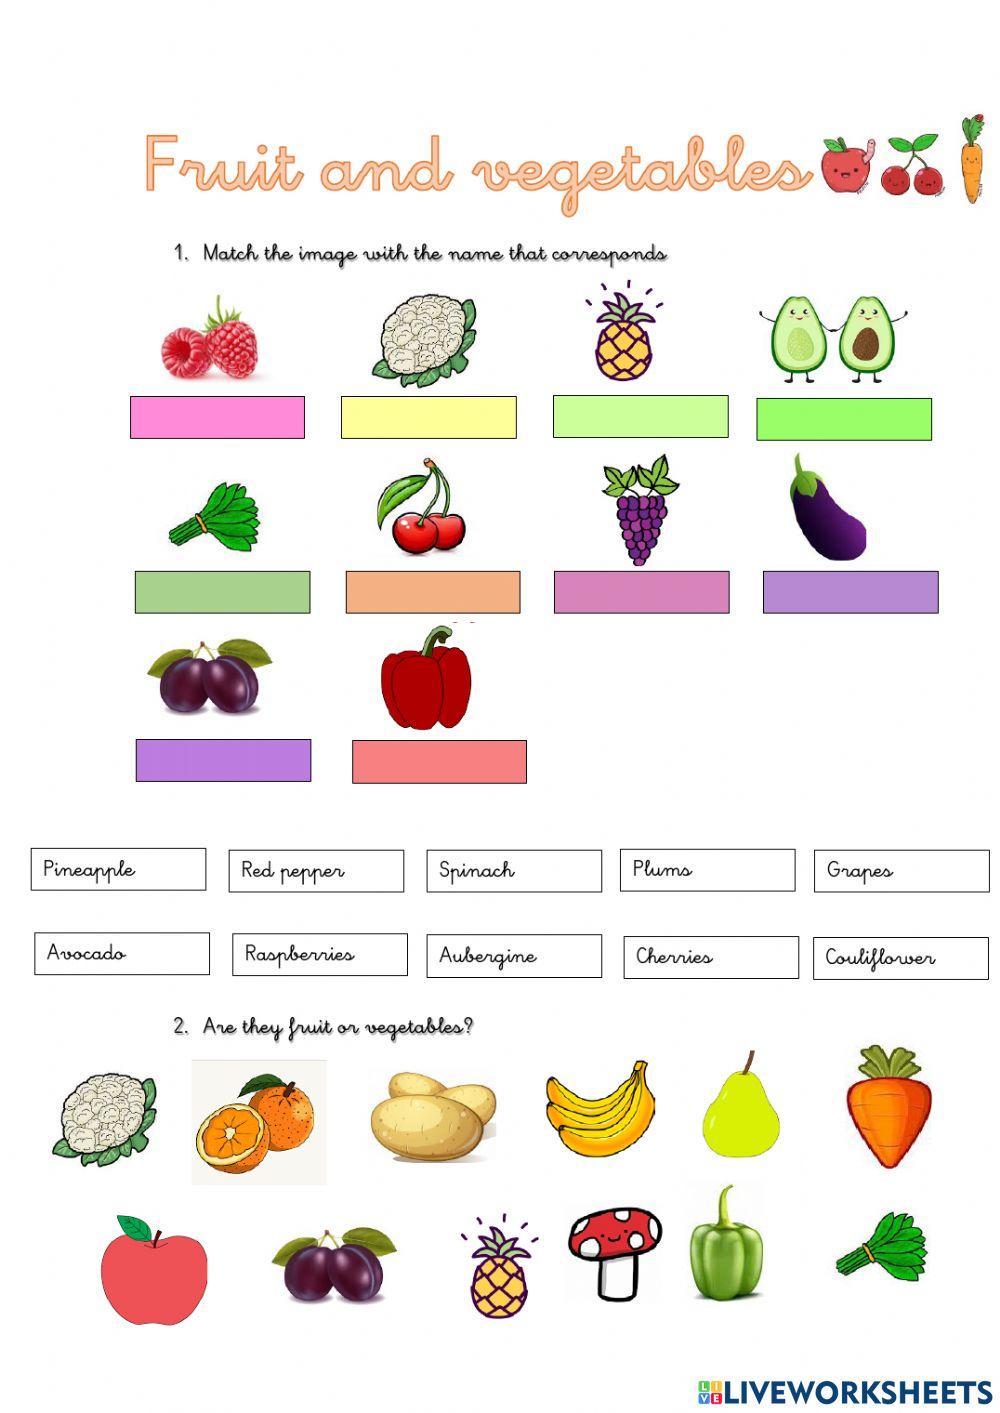 Fruits and vegetables 1